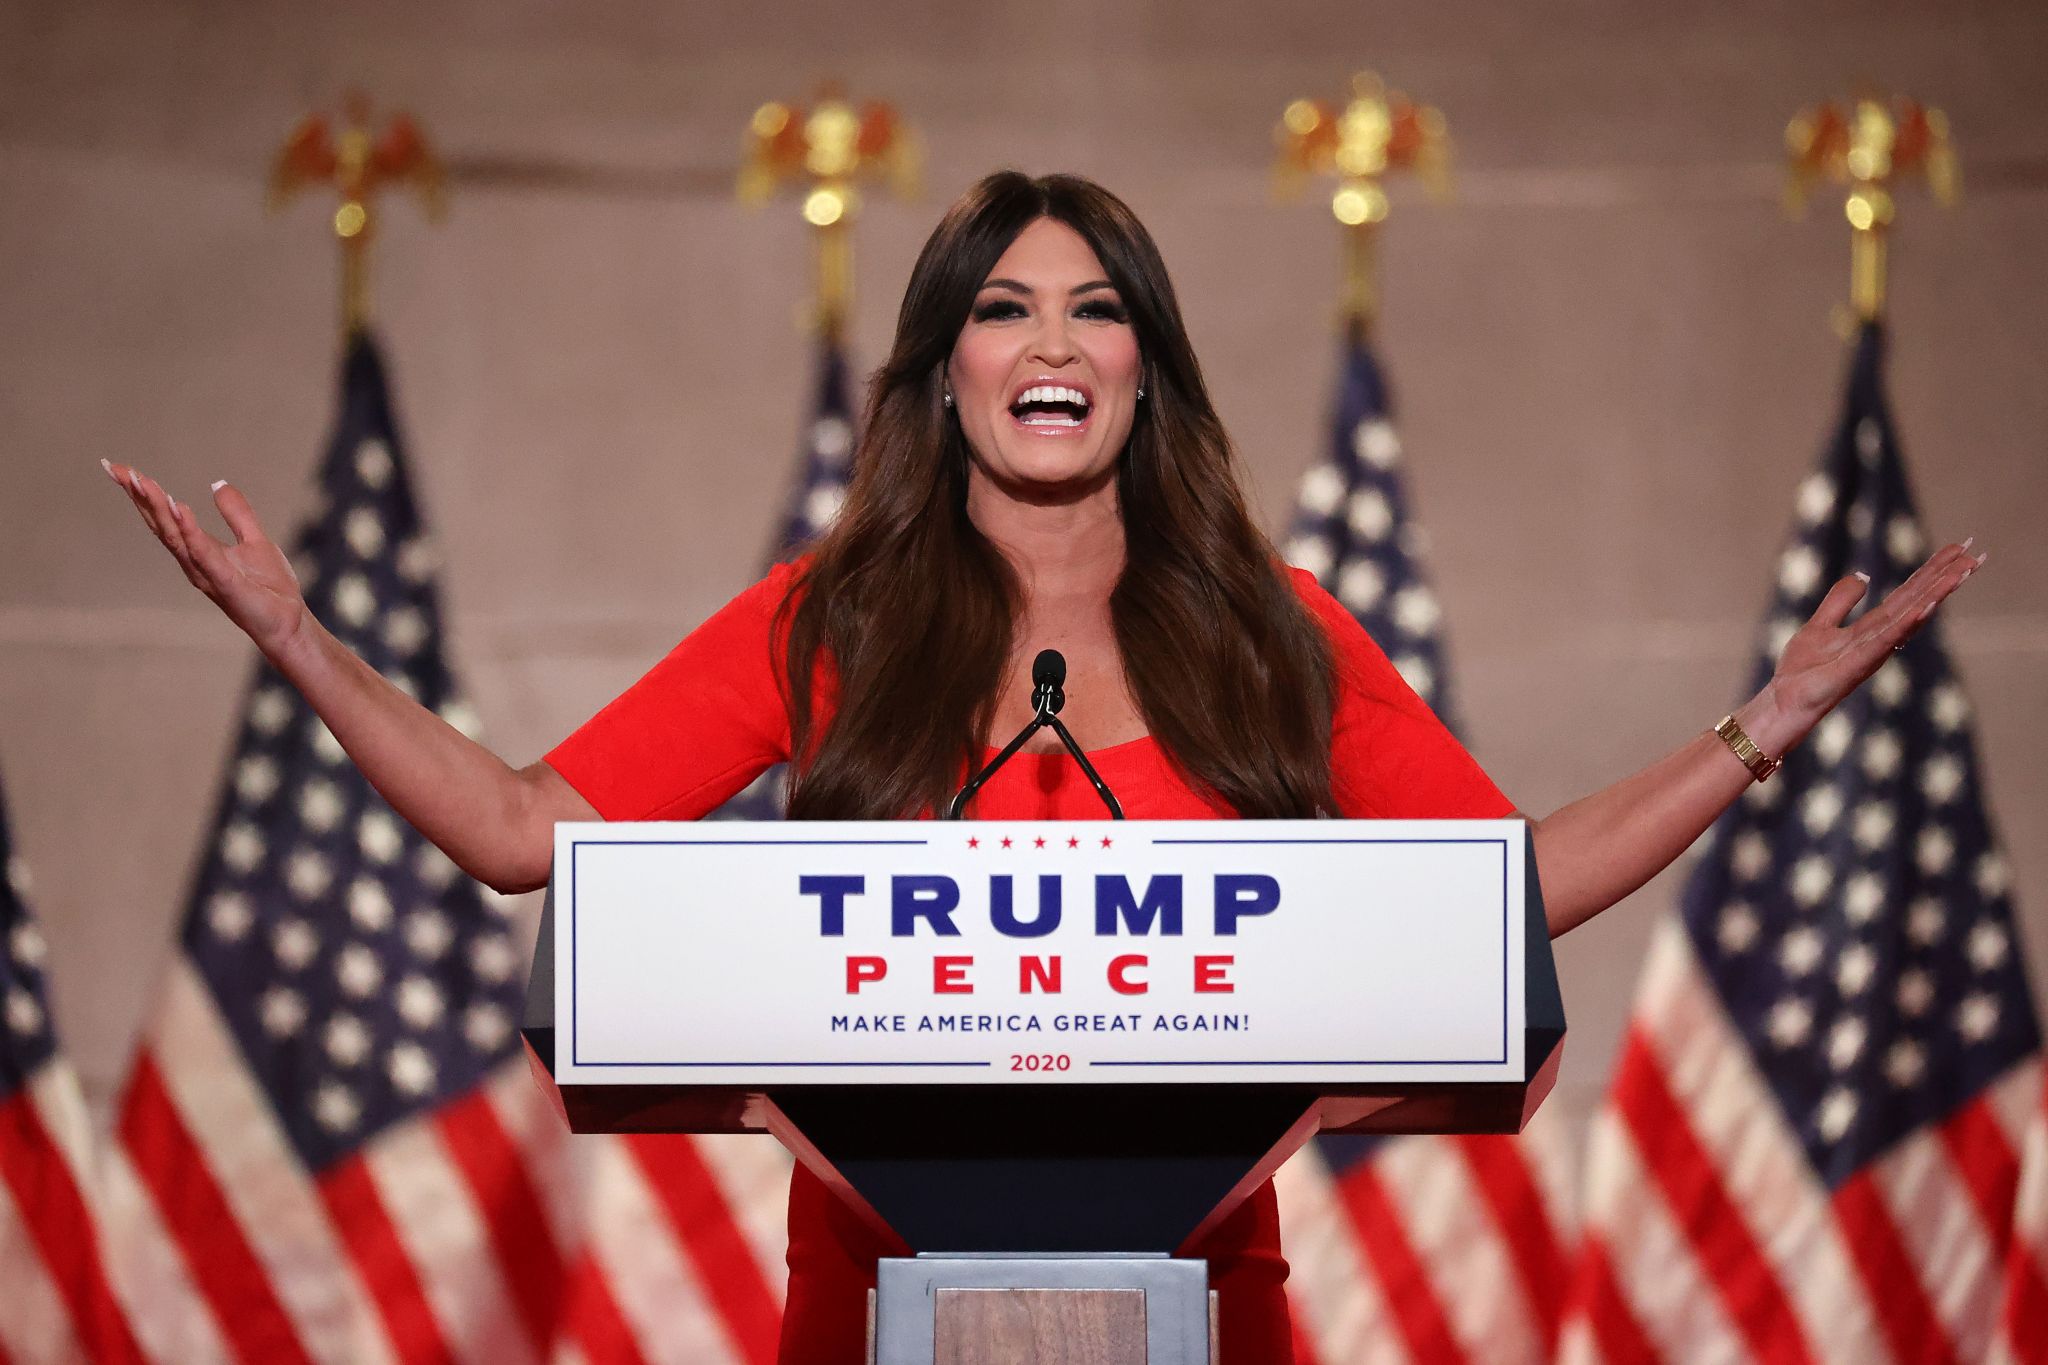 Kimberly Guilfoyle is being urged to return to California, run for public office